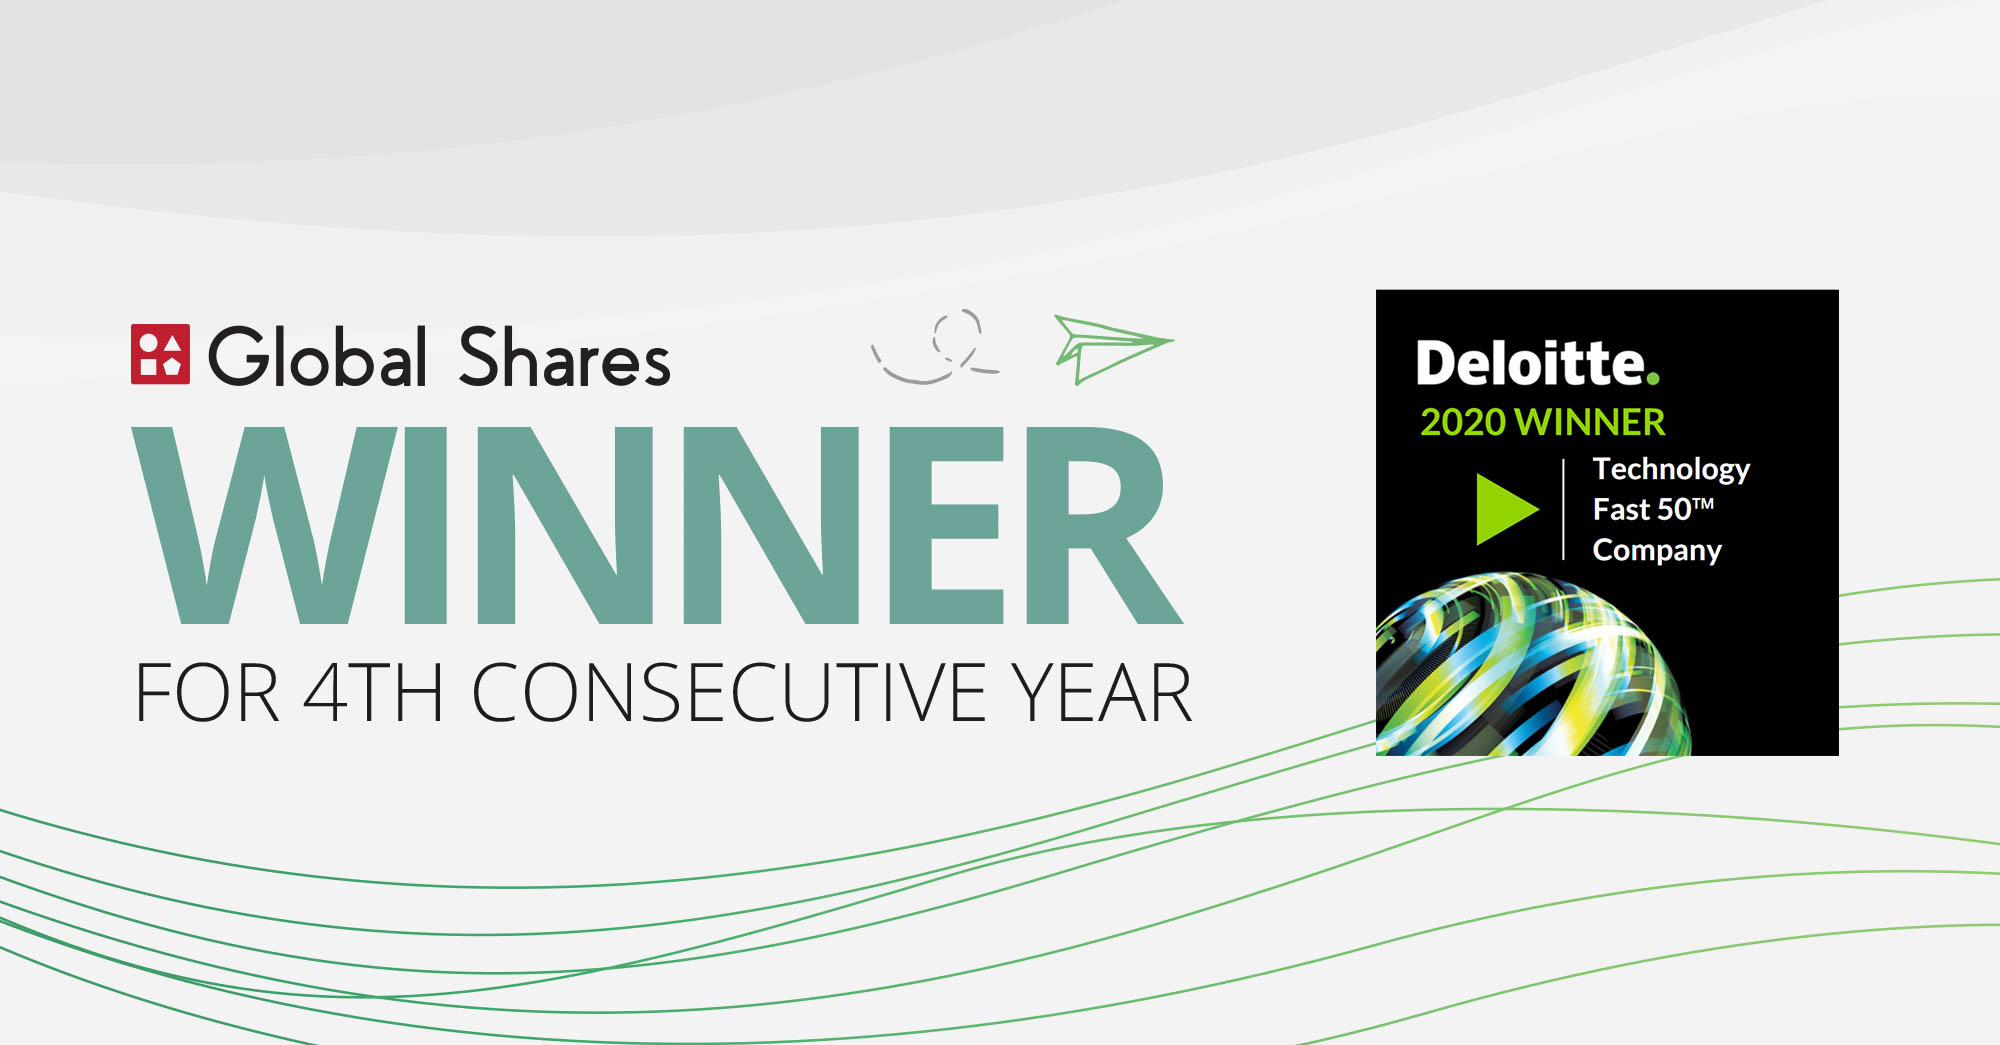 Deloitte Fast50™ winner for 4th consecutive year